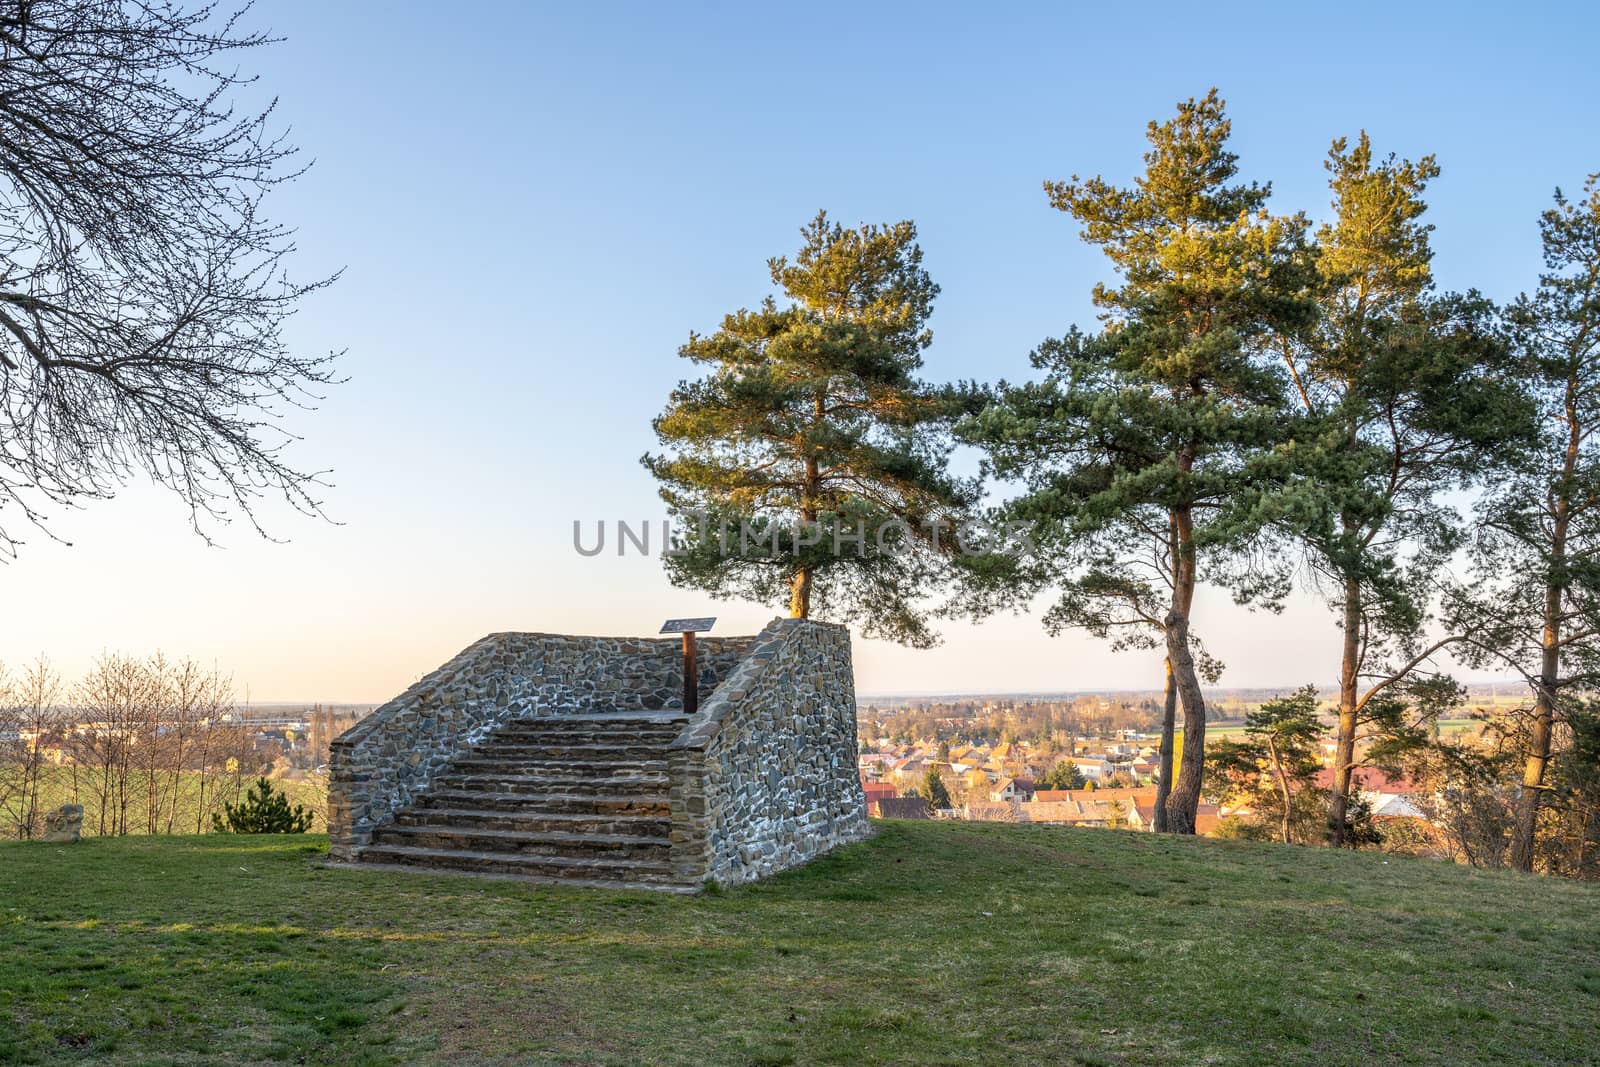 Pichora Marcomanni burial ground south of Dobrichov in the Kolin region Czech republic. Archaeological excavations With small lookout tower near the pine trees with wiew to small city Dobrichov.